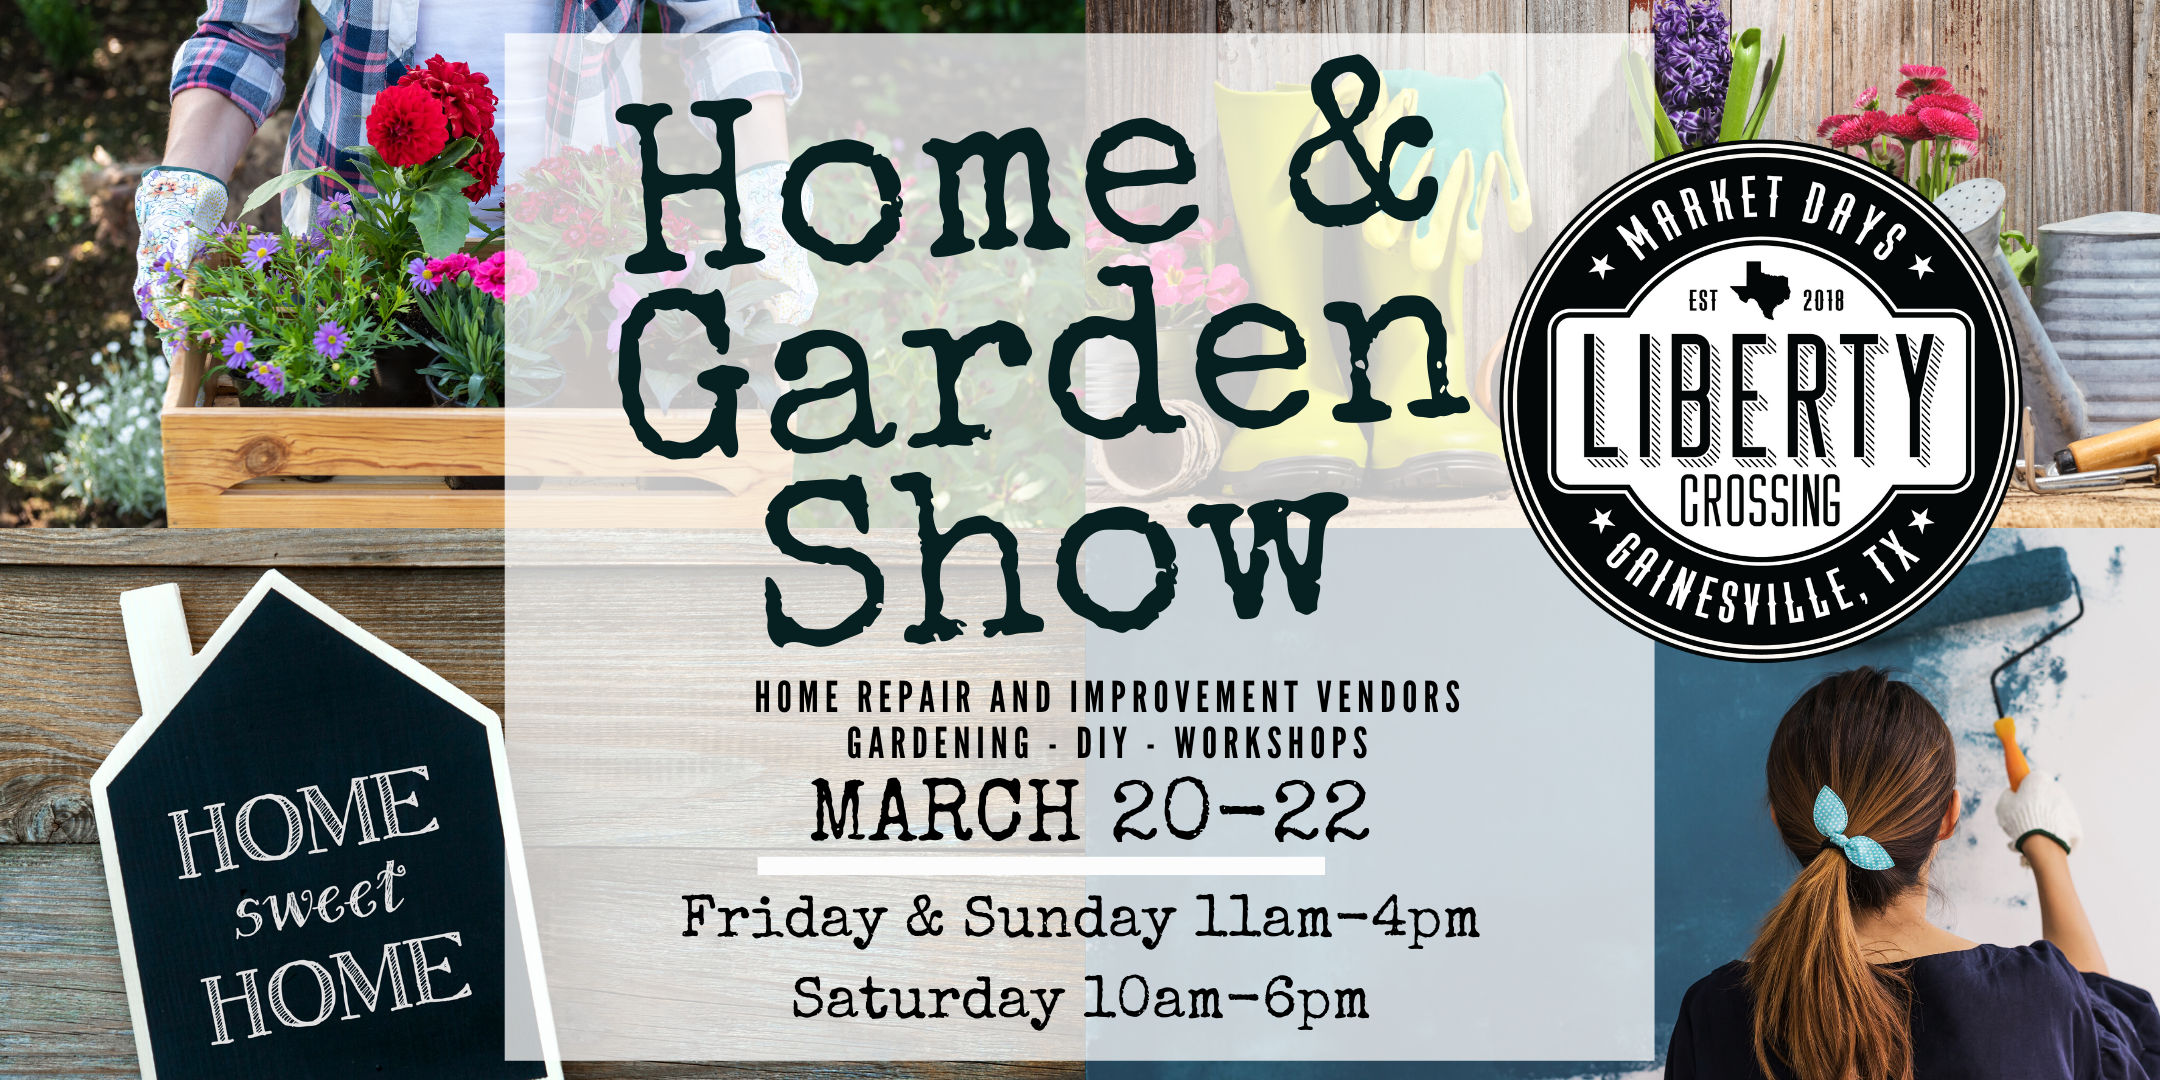 Home Garden Show Market Days At Liberty Crossing 20 Mar 2020